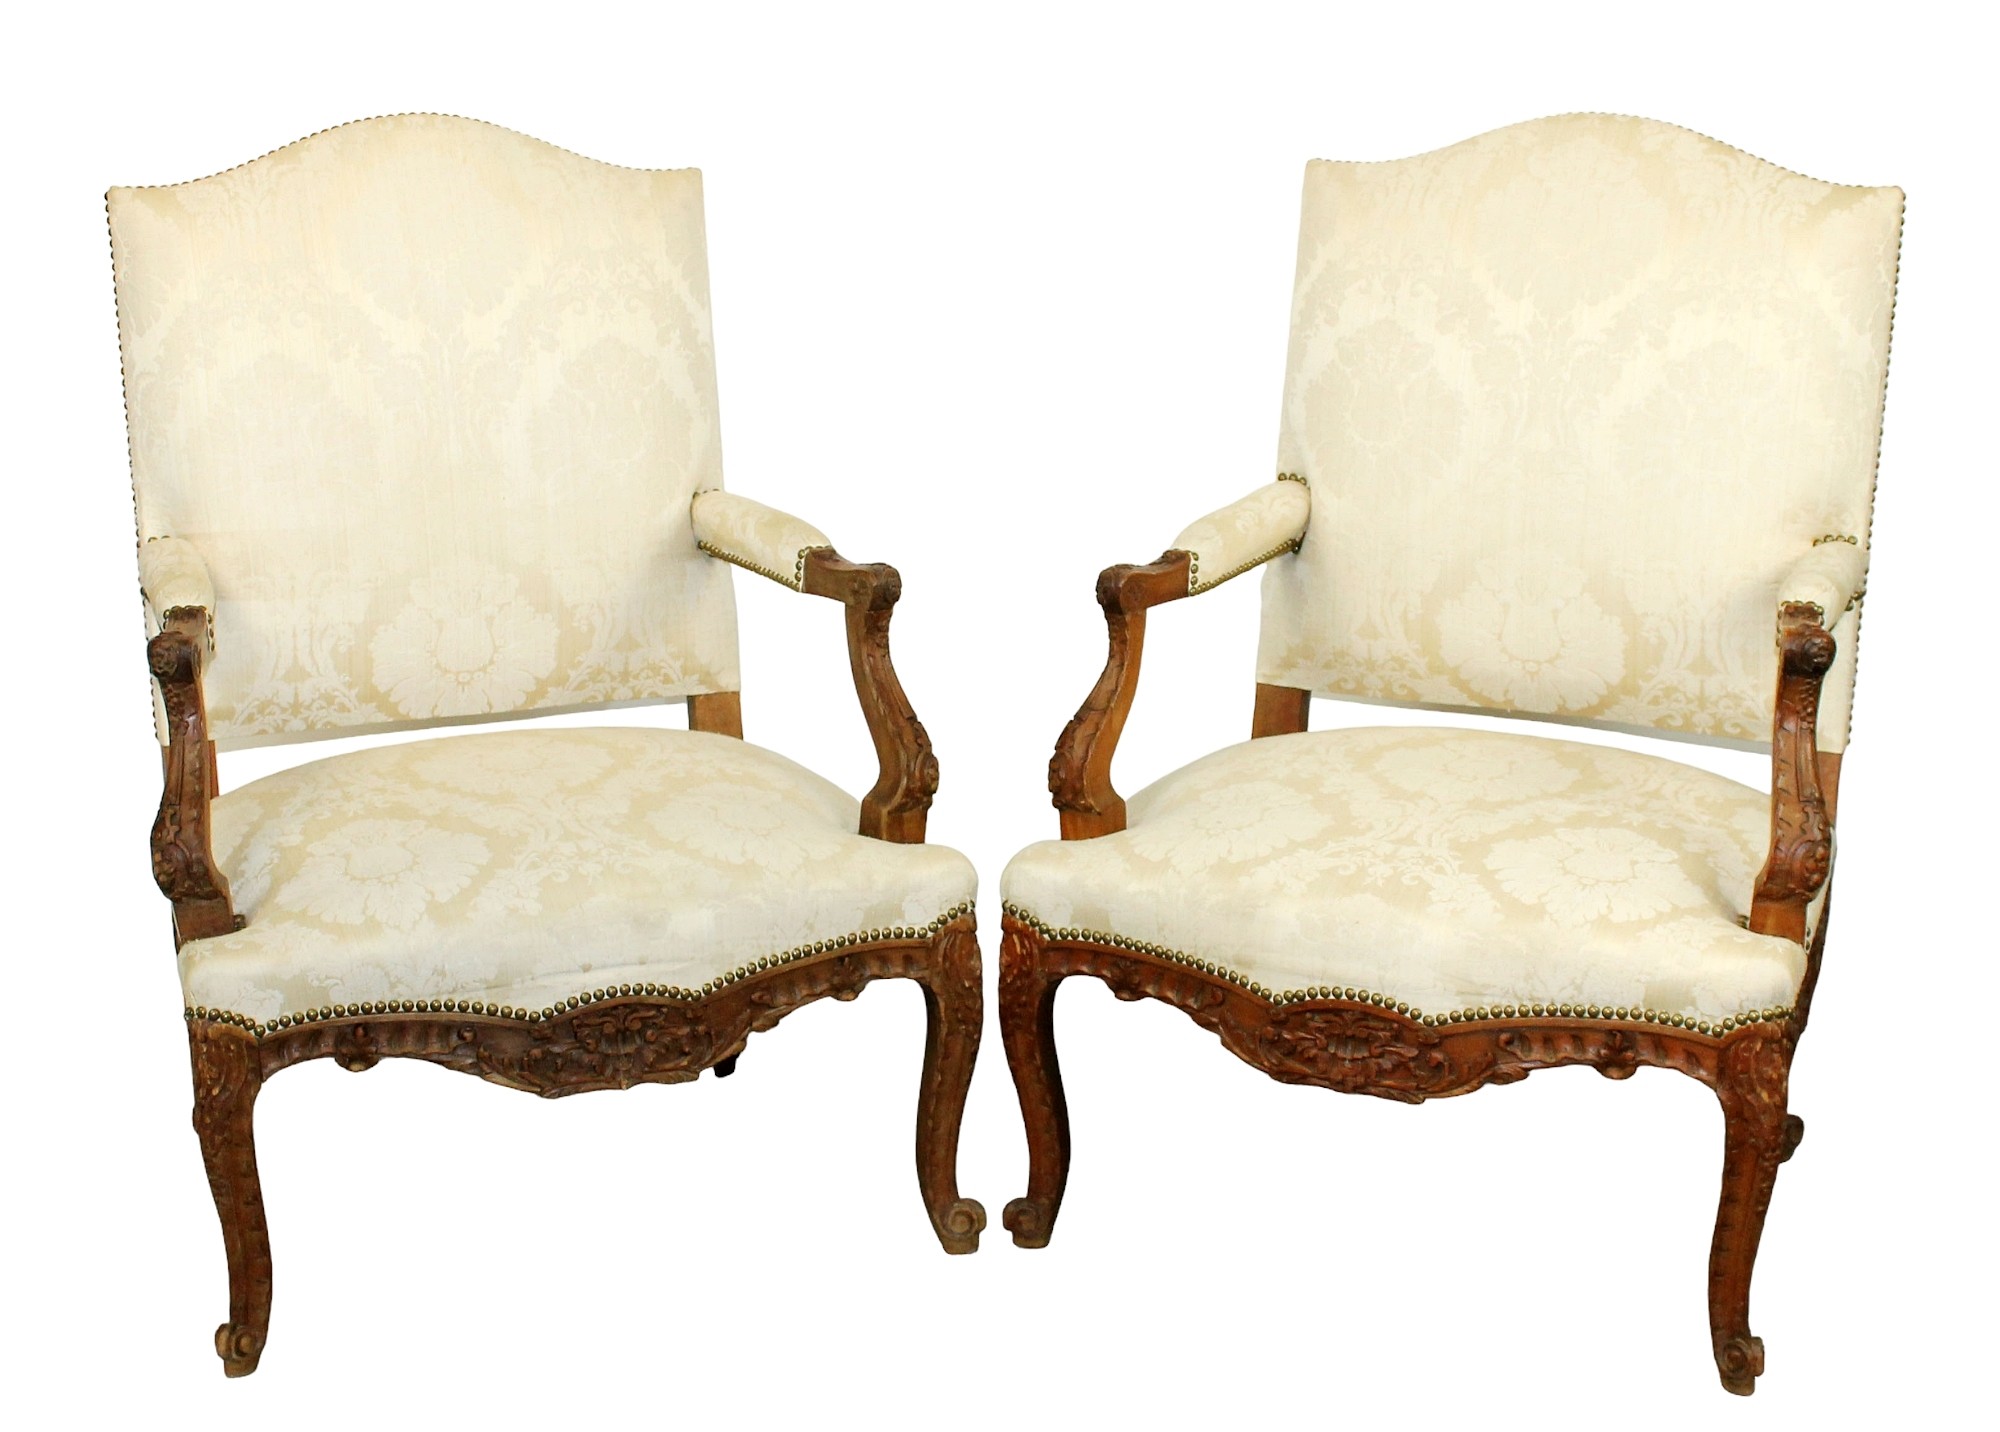 Pair of French Louis Xv style fauteuil armchairs